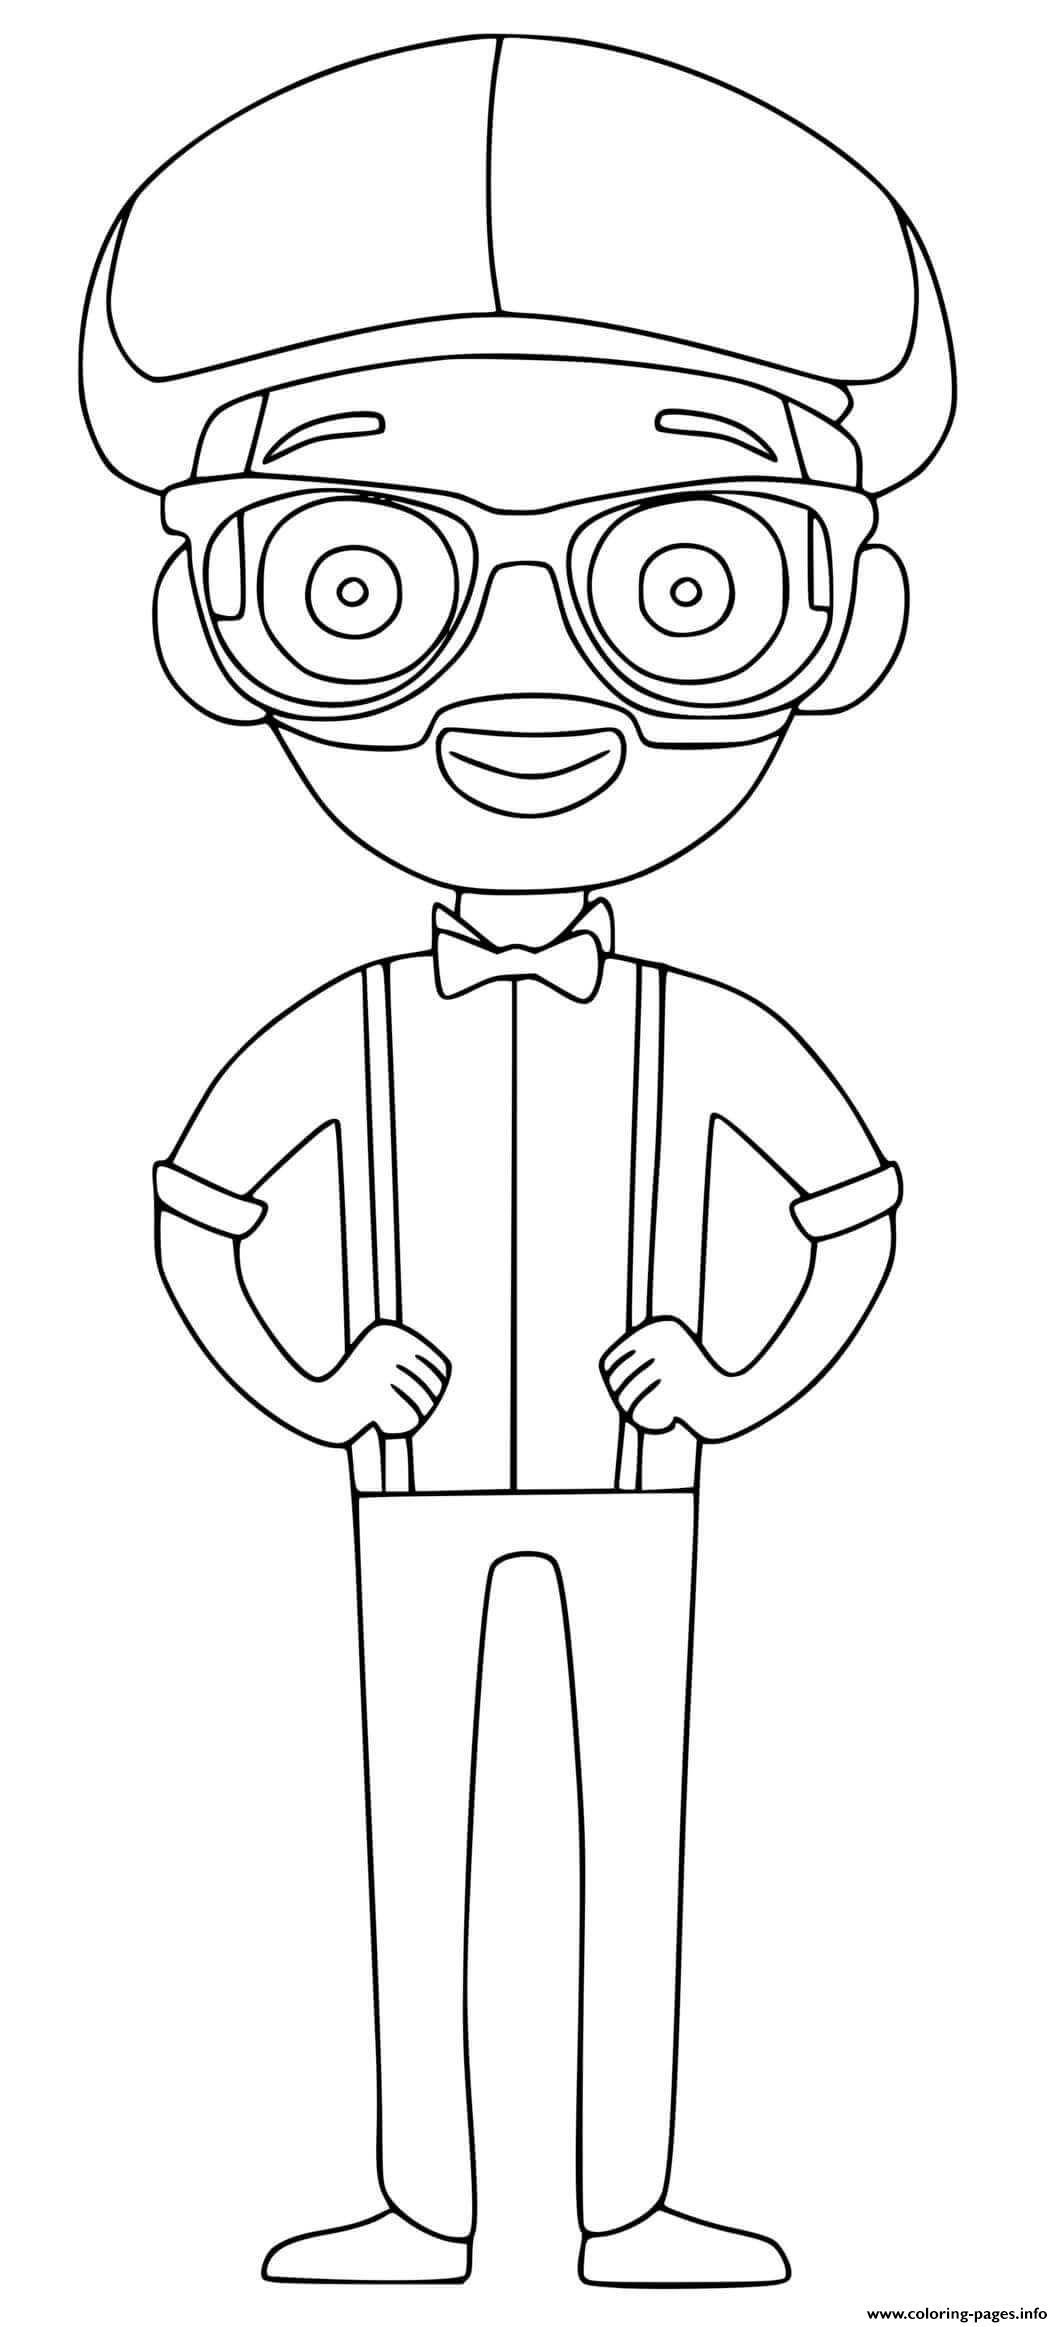 Blippi Fun Energetic coloring pages